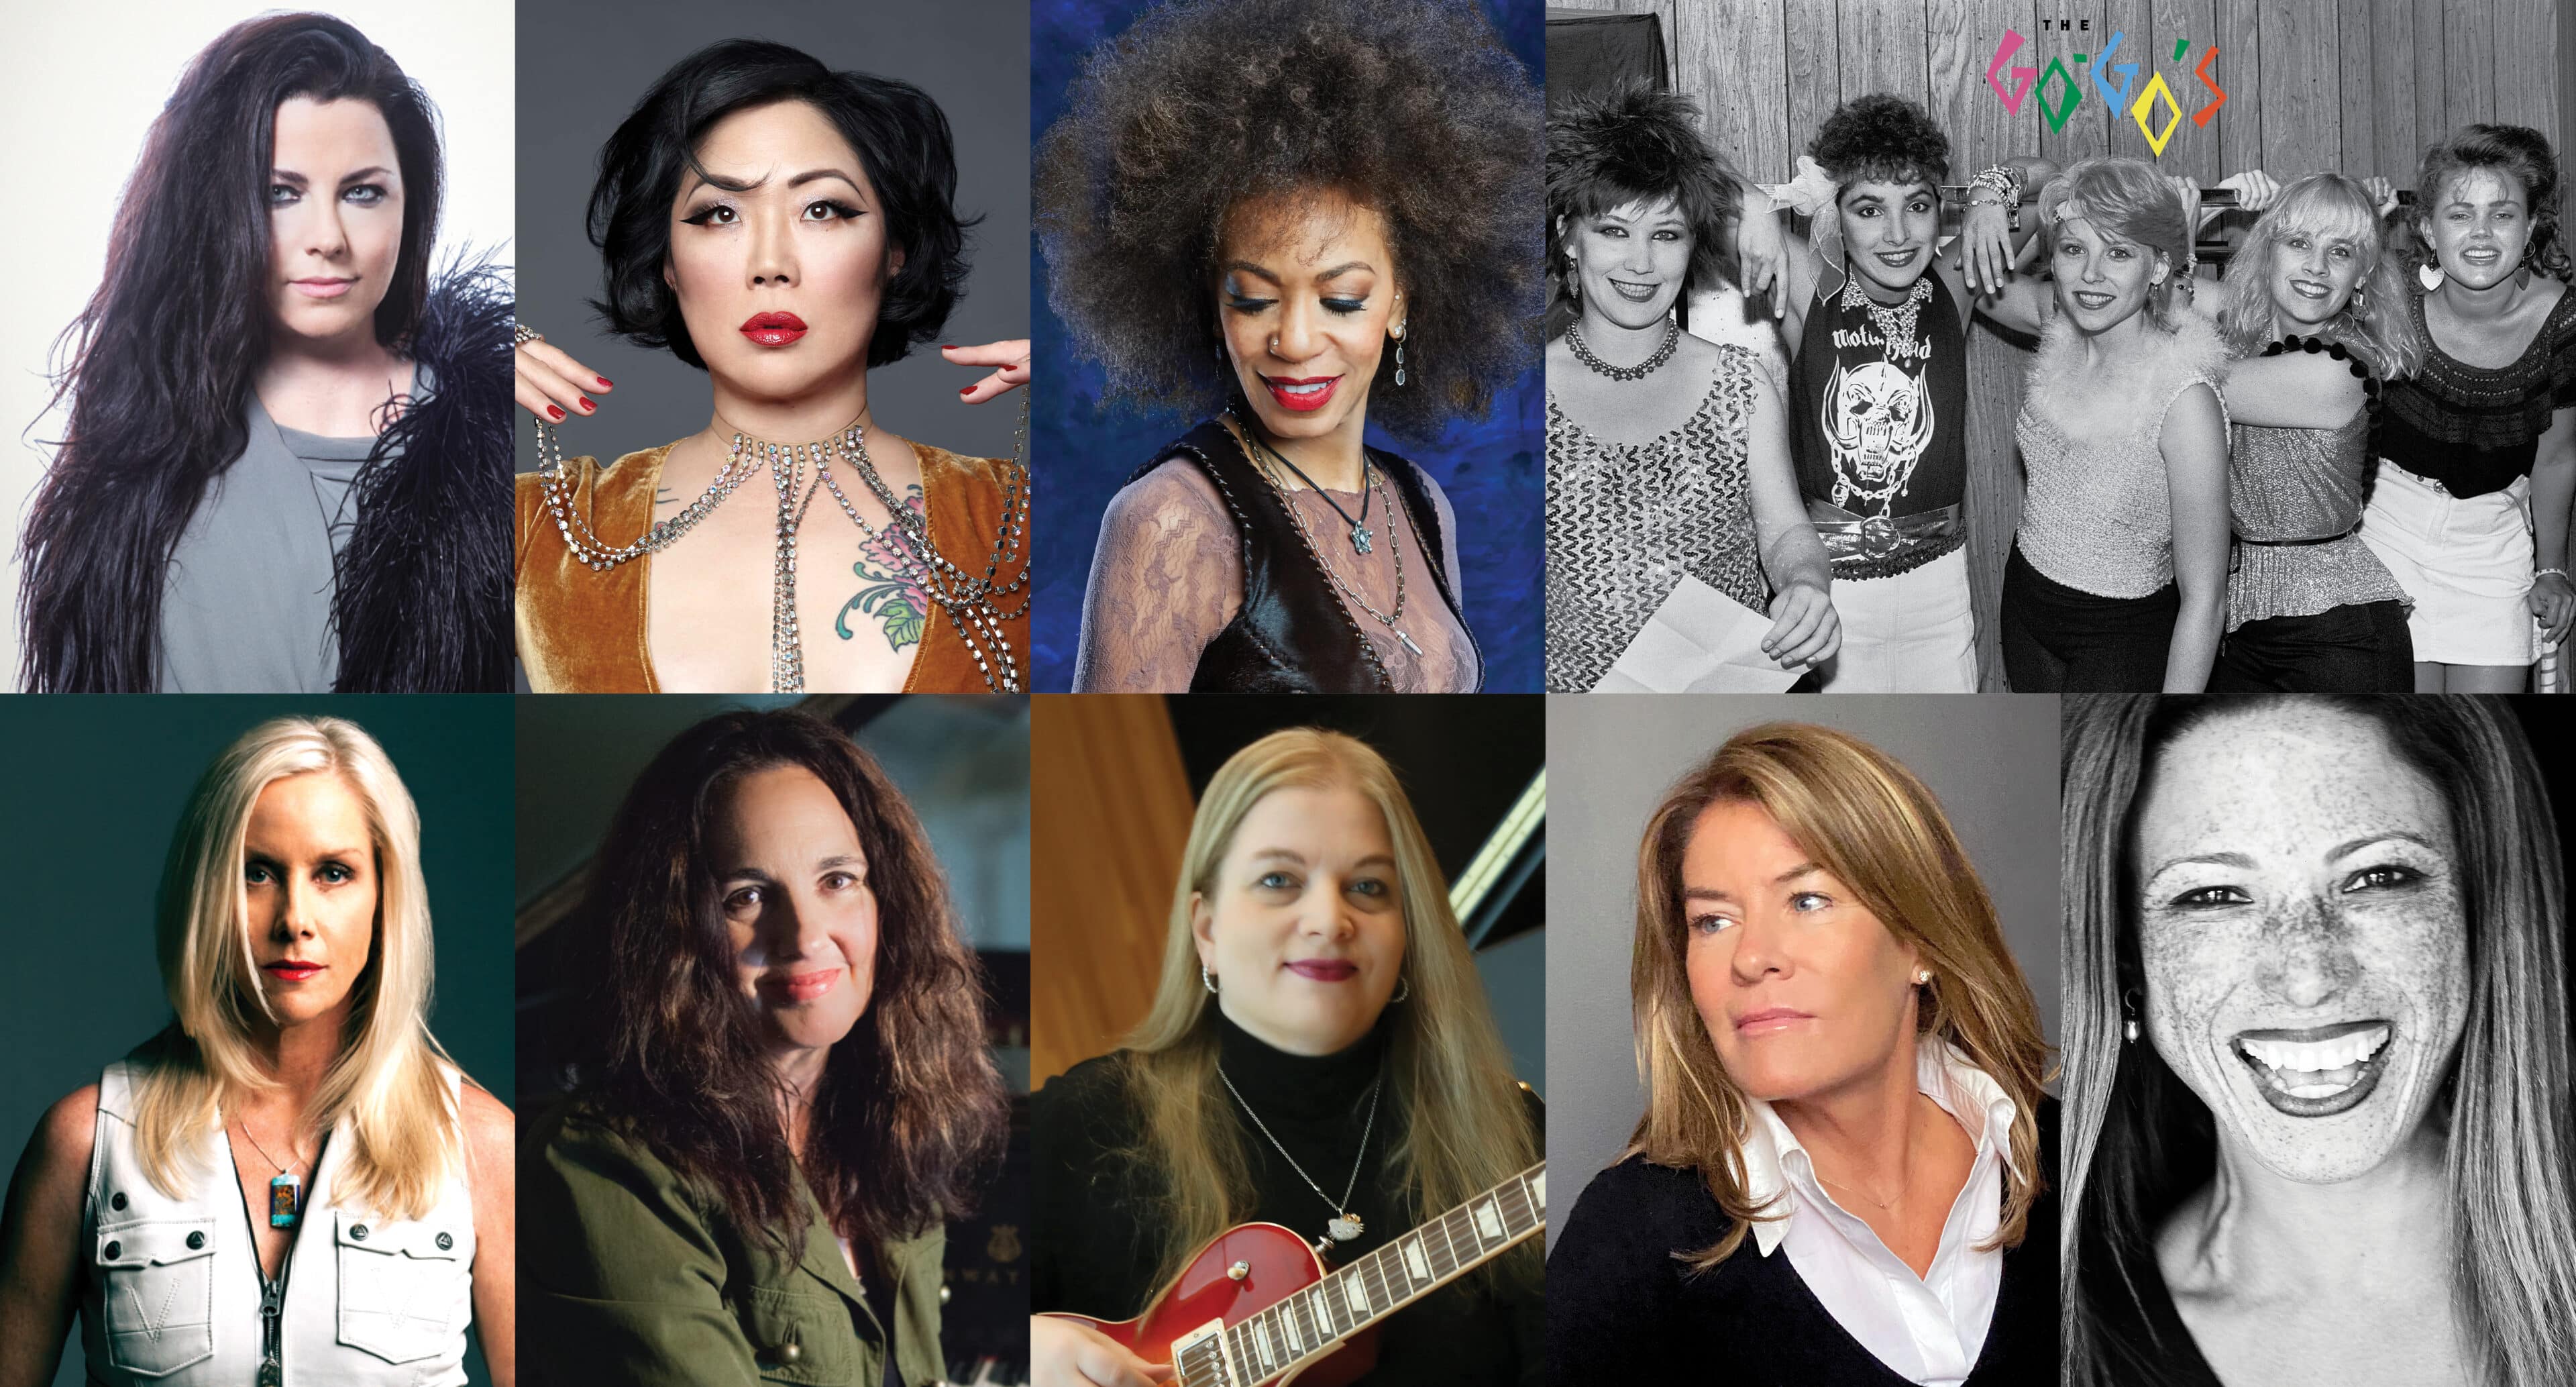 The Go-Go’s, Evanescence’s Amy Lee, Cherie Currie, Cindy Blackman Among The Honorees At 2021 She Rocks Awards